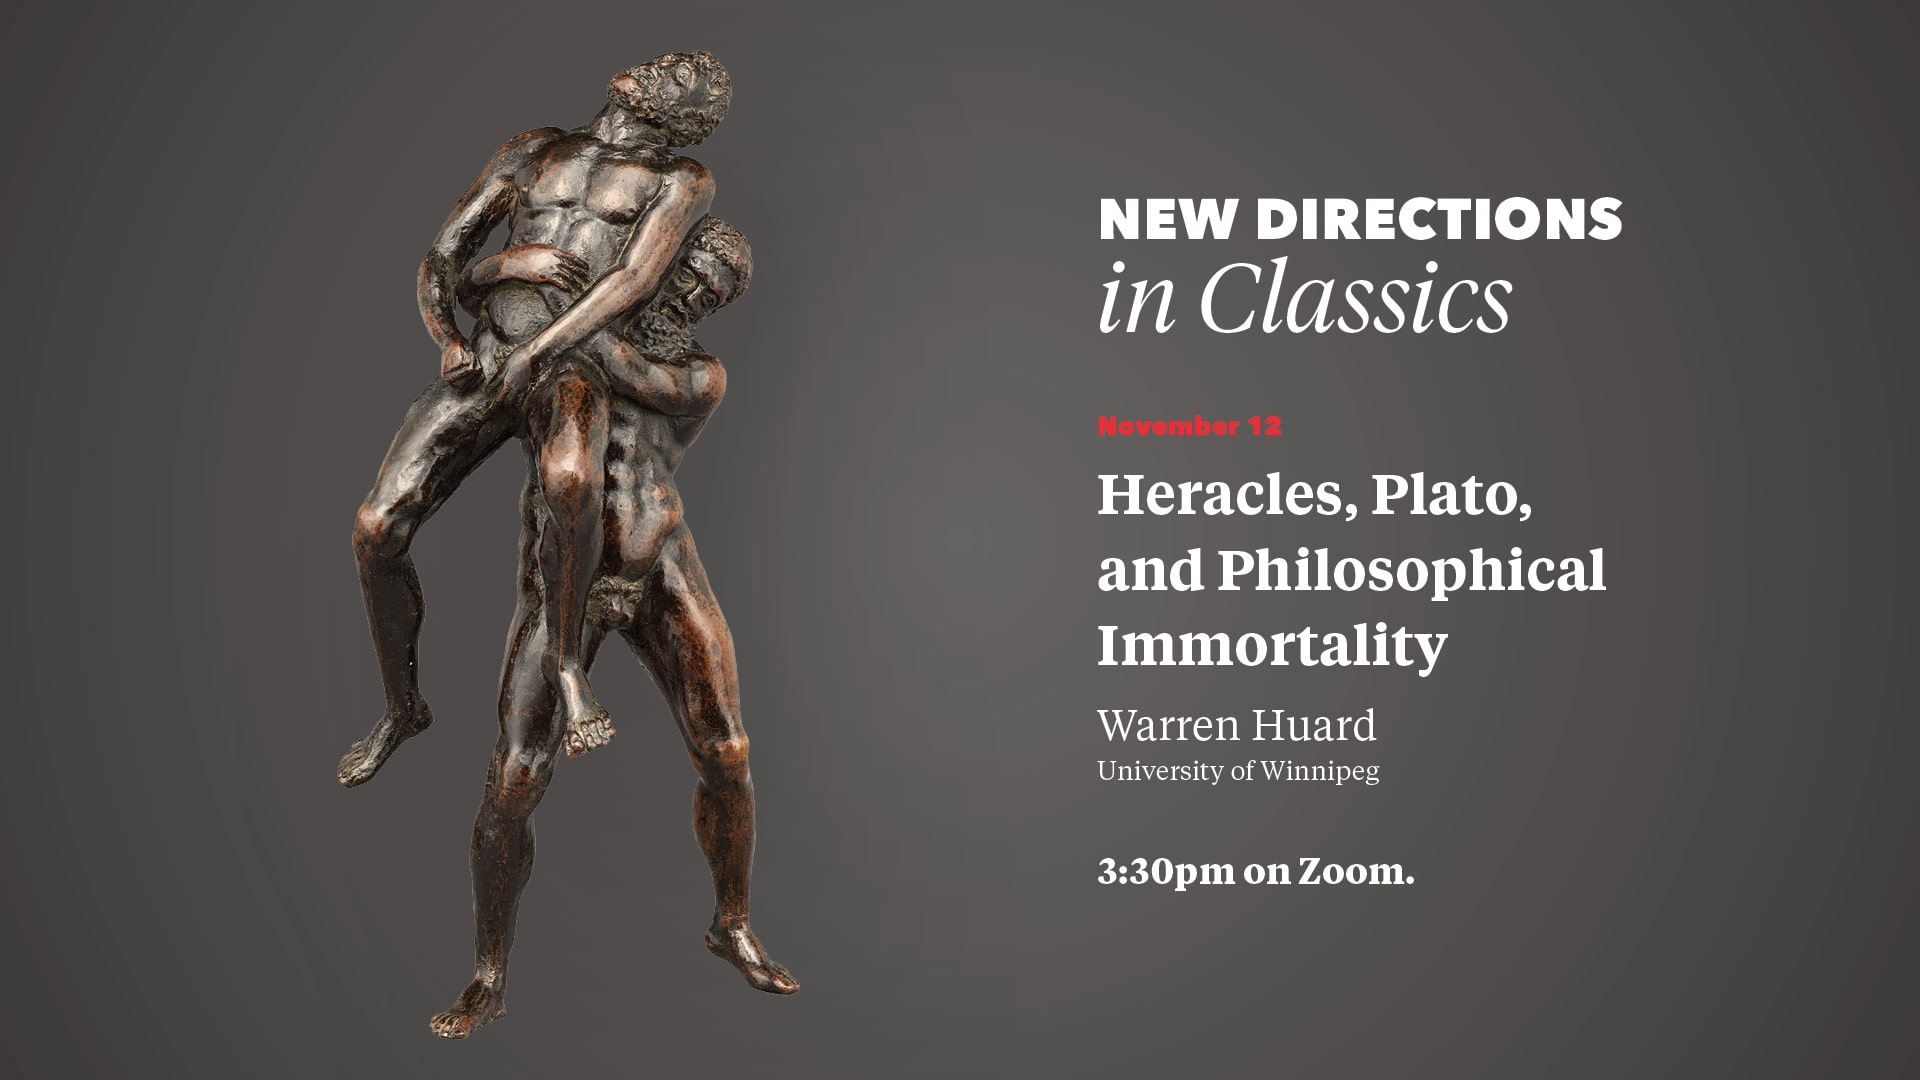 Promo image for New Directions in Classics lecture on Nov 12; full text on web page